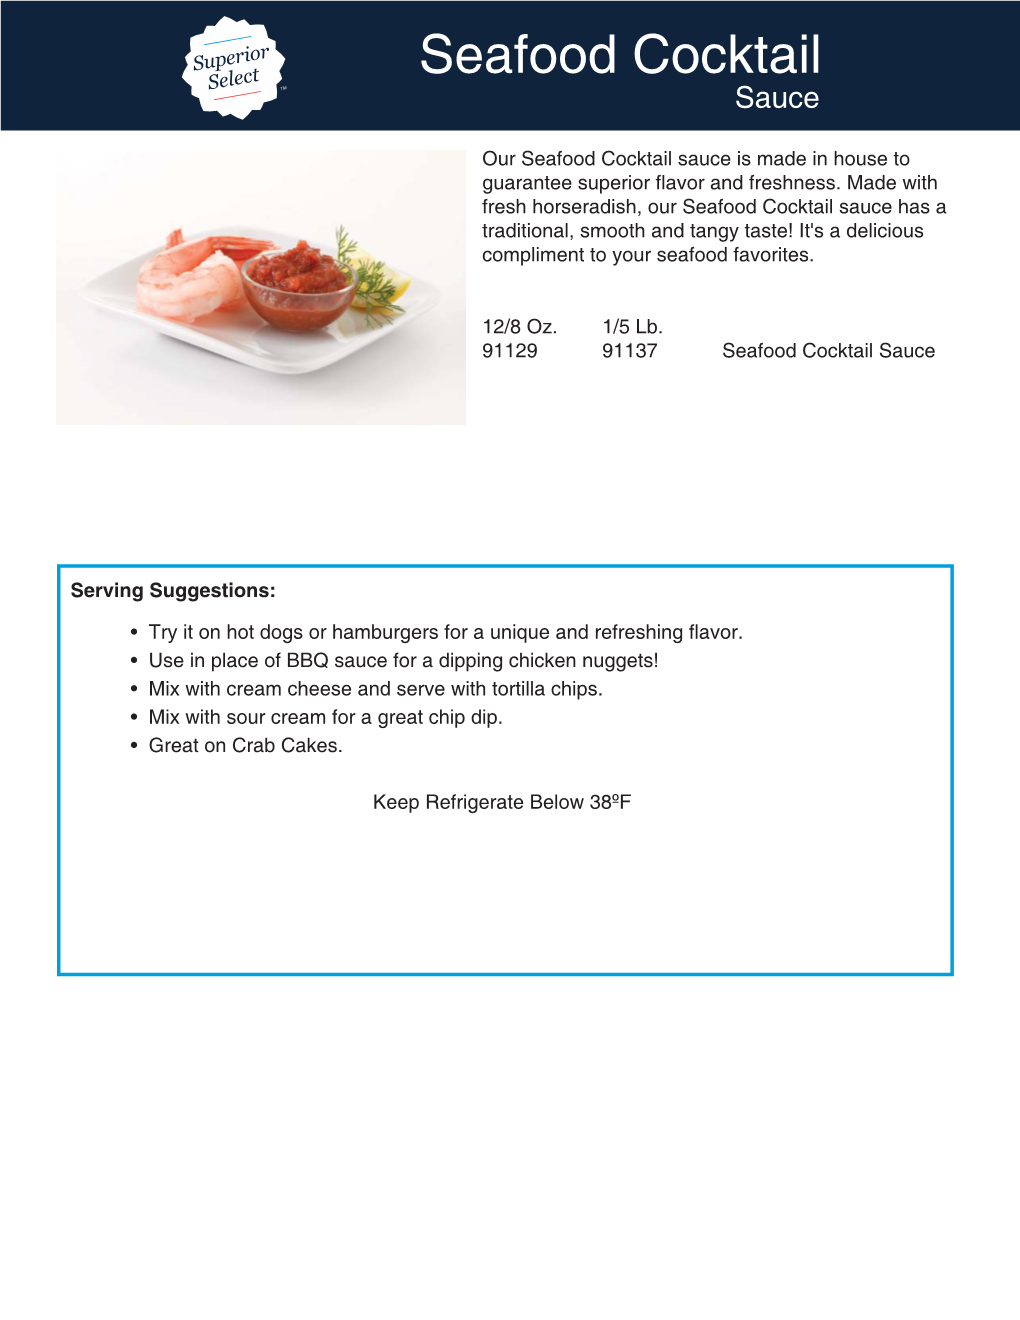 Seafood Cocktail Sauce Specification Sheet.Ai